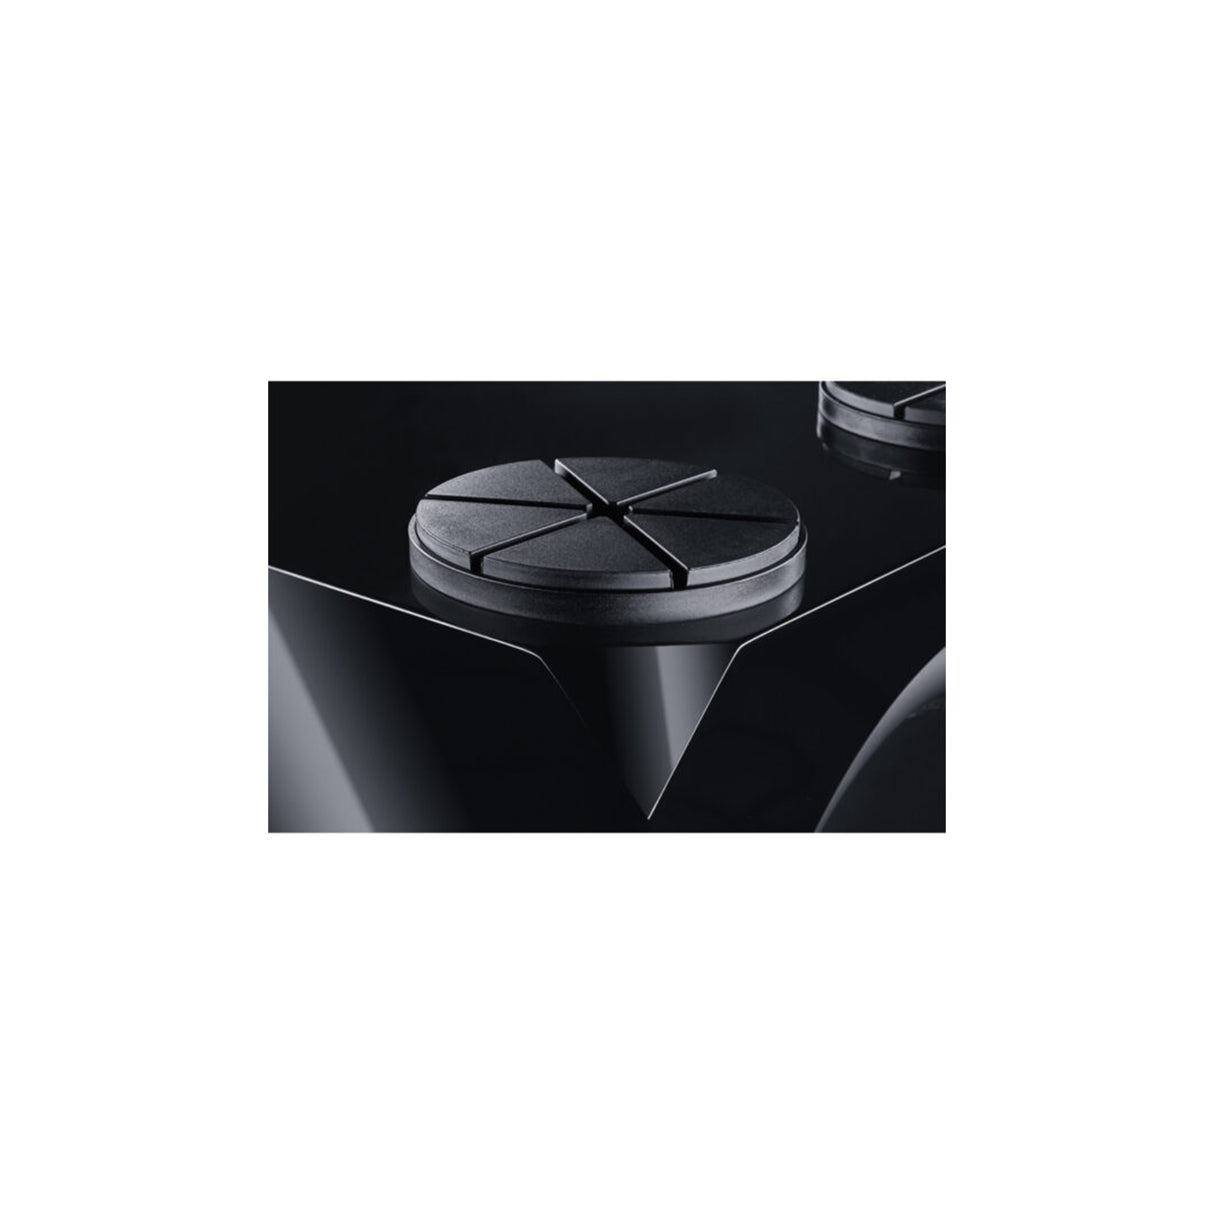 Magnat Omega CS12 -12 Inches Powered Subwoofer